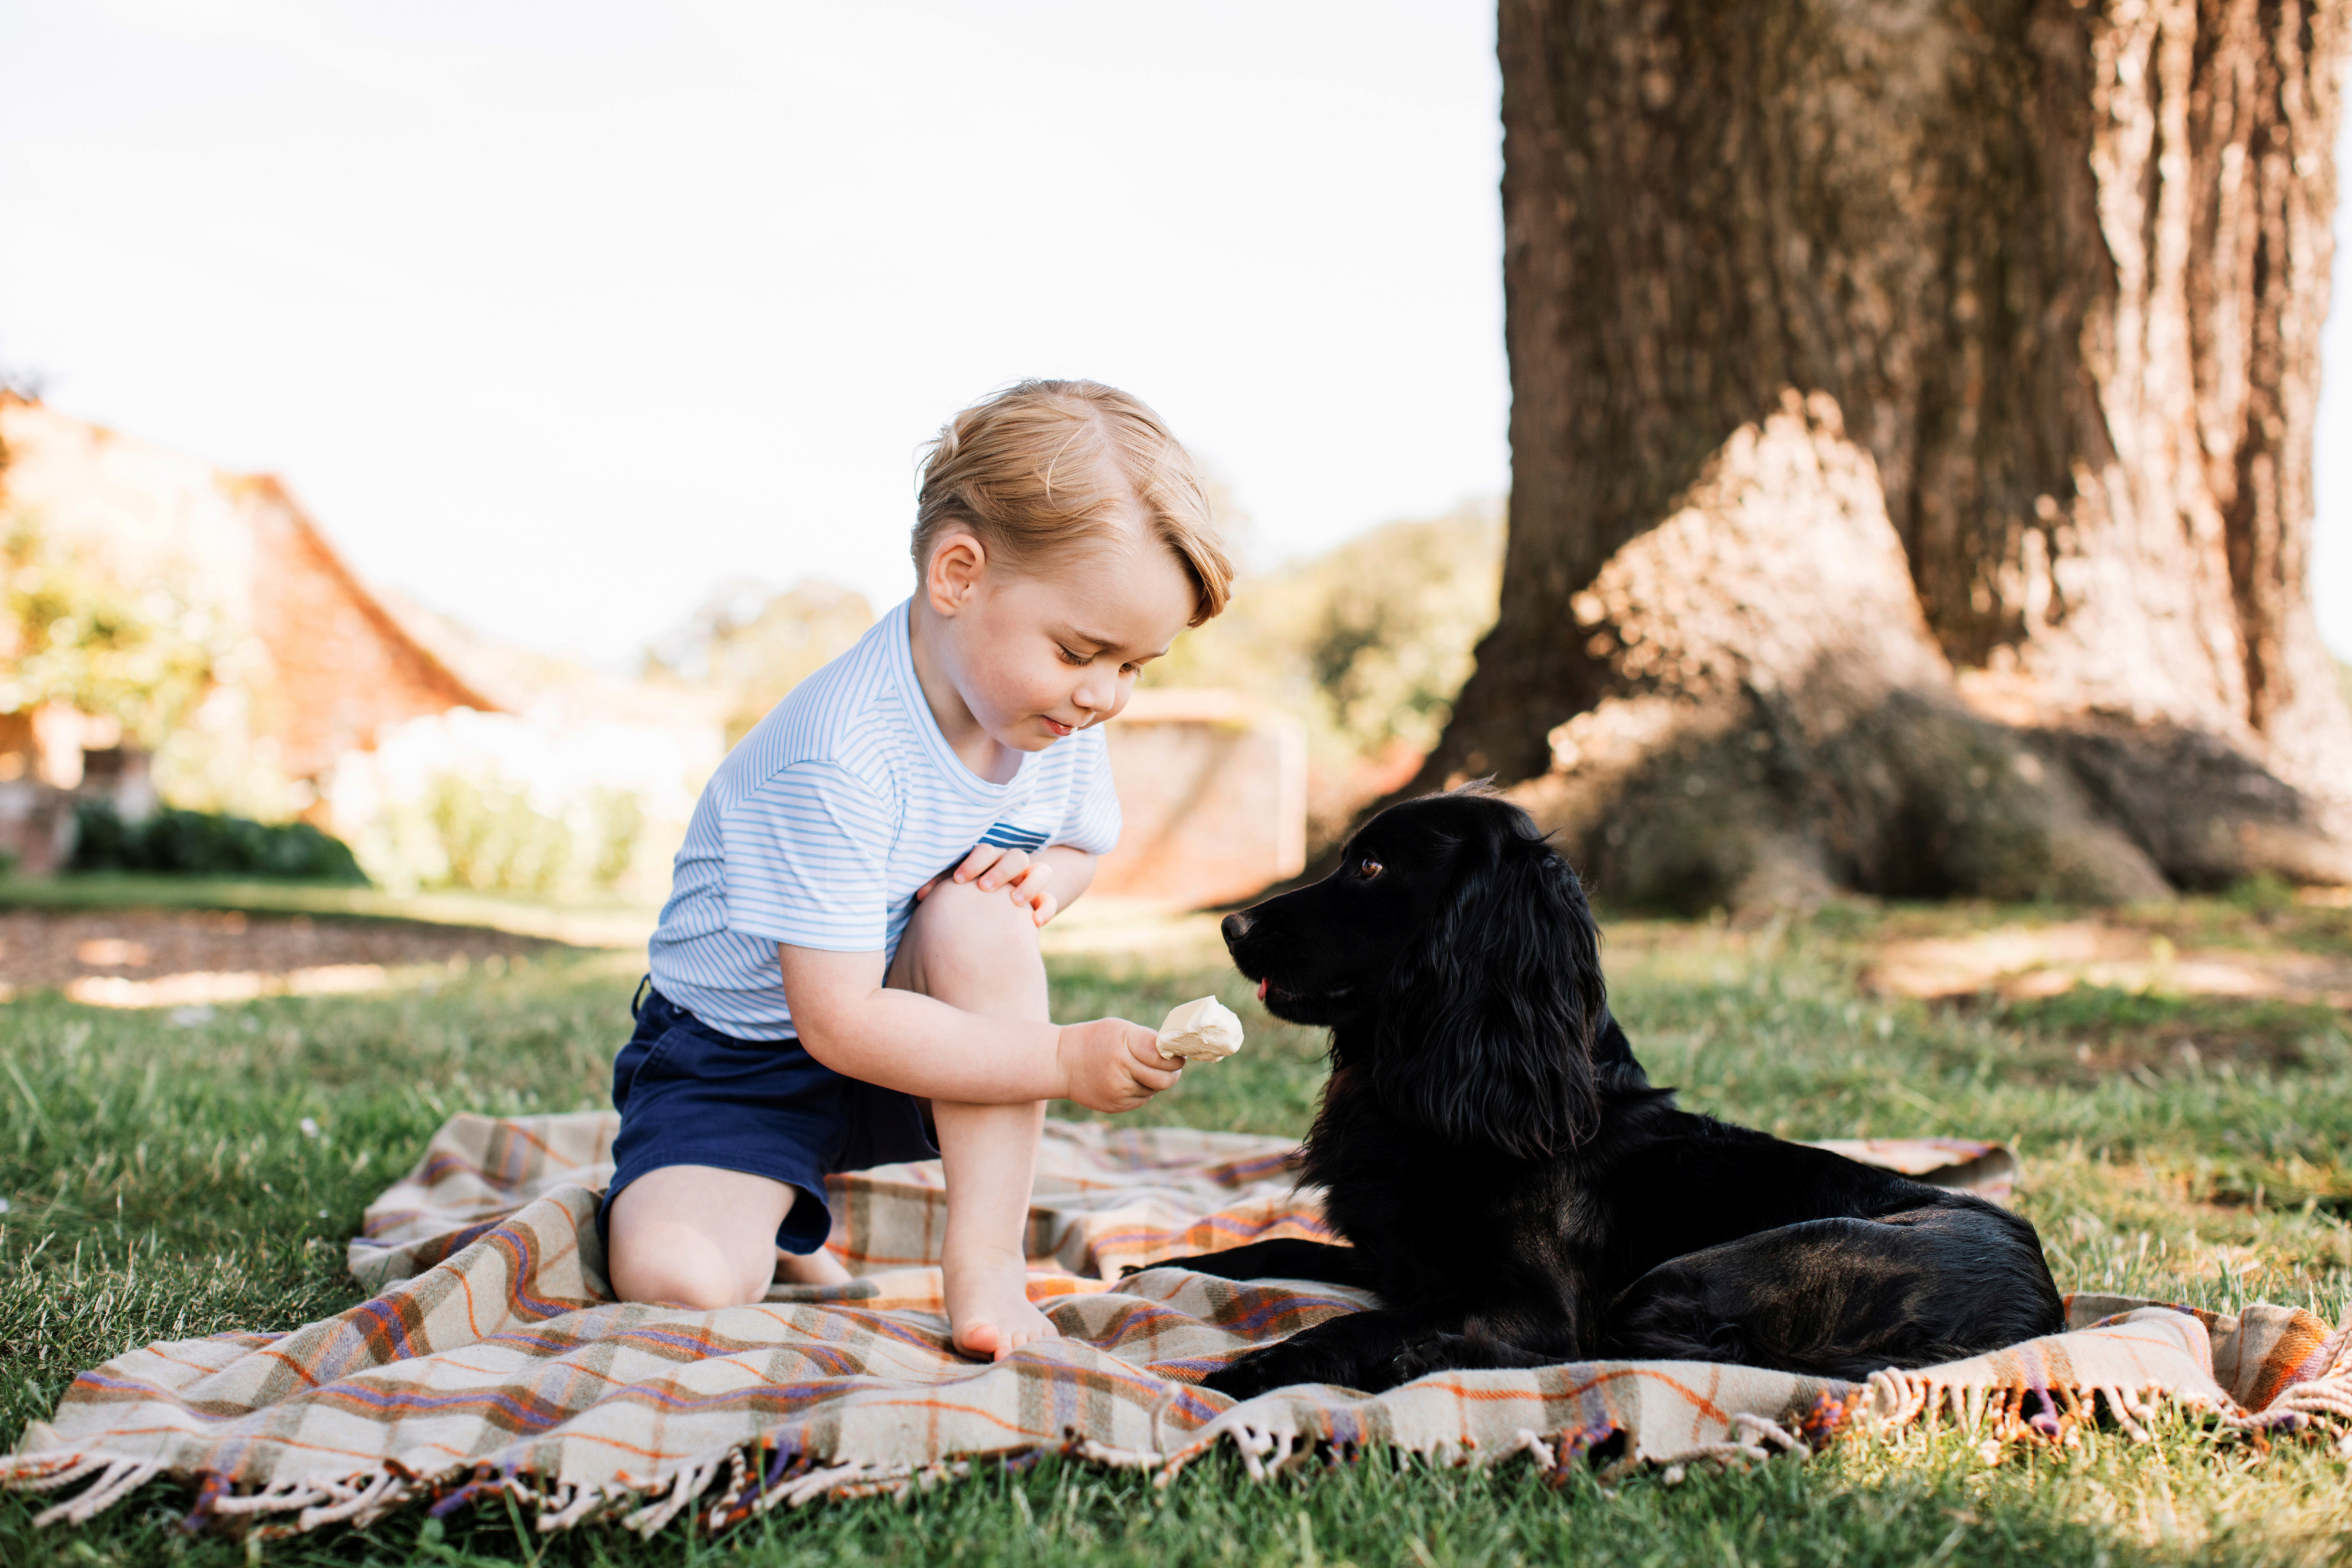 Britain's Prince George is seen with the family pet dog, Lupo, in this photograph taken in mid-July at his home in Norfolk and released by Kensington Palace to mark his third birthday, in London, July 22, 2016. (Matt Porteous—Handout/Reuters)